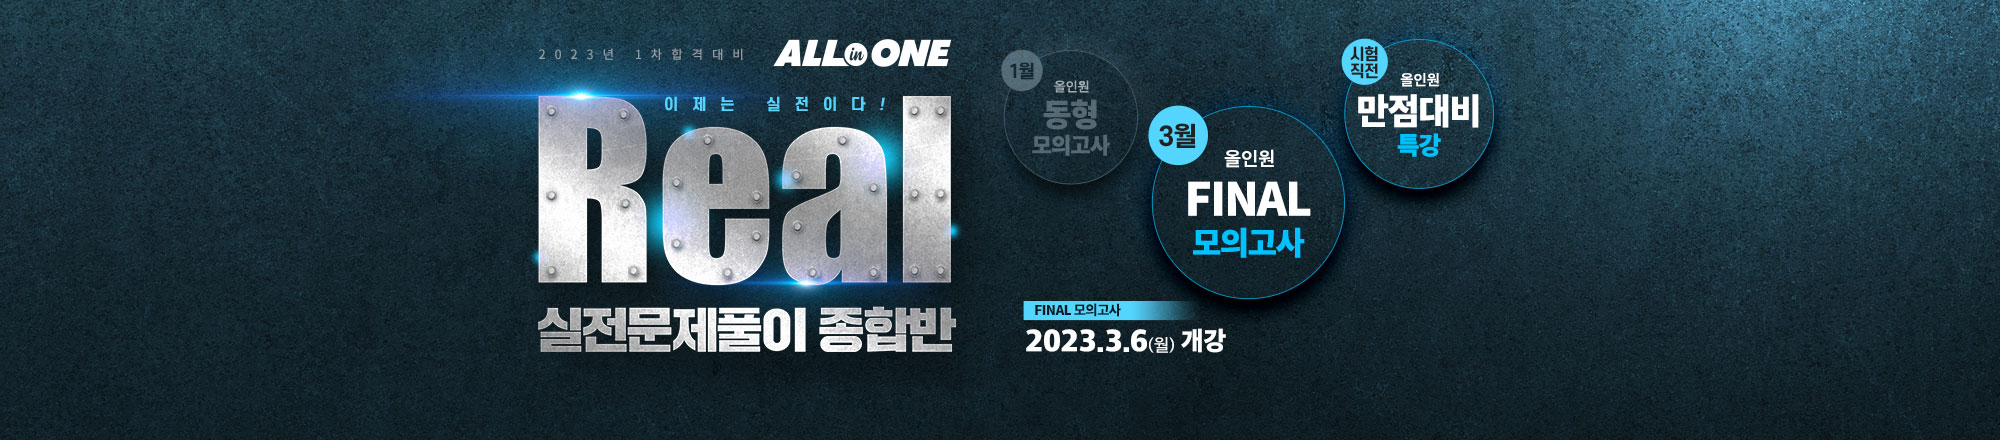 2023 Real 실전문풀 FINAL